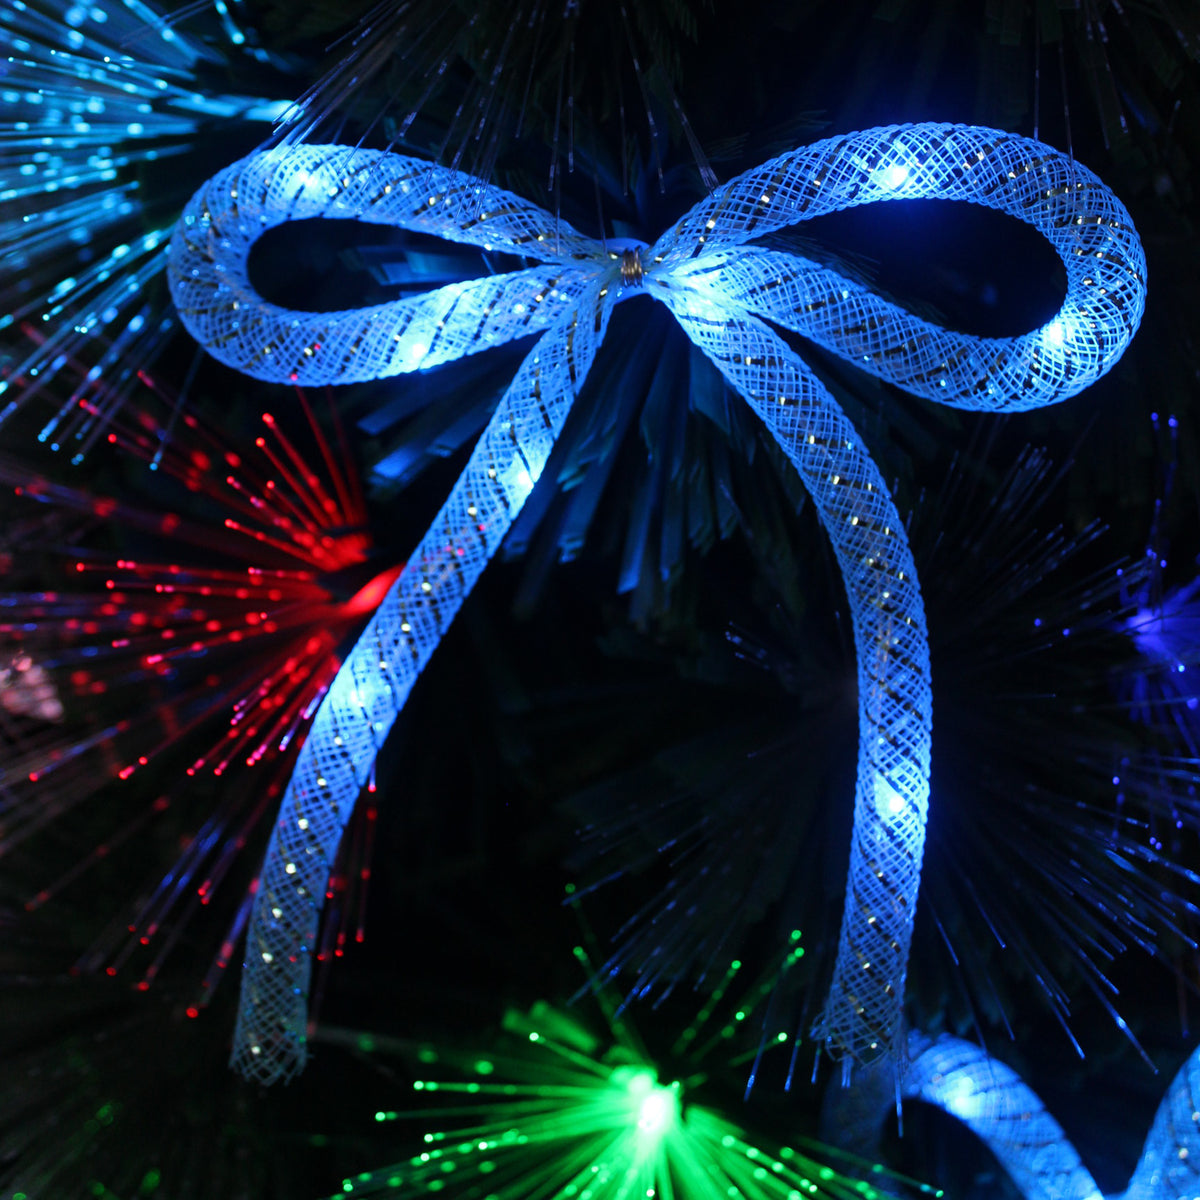 Green Fibre Optic Christmas Tree 2ft to 7ft with Multi Coloured LED Lights and Blue Bows